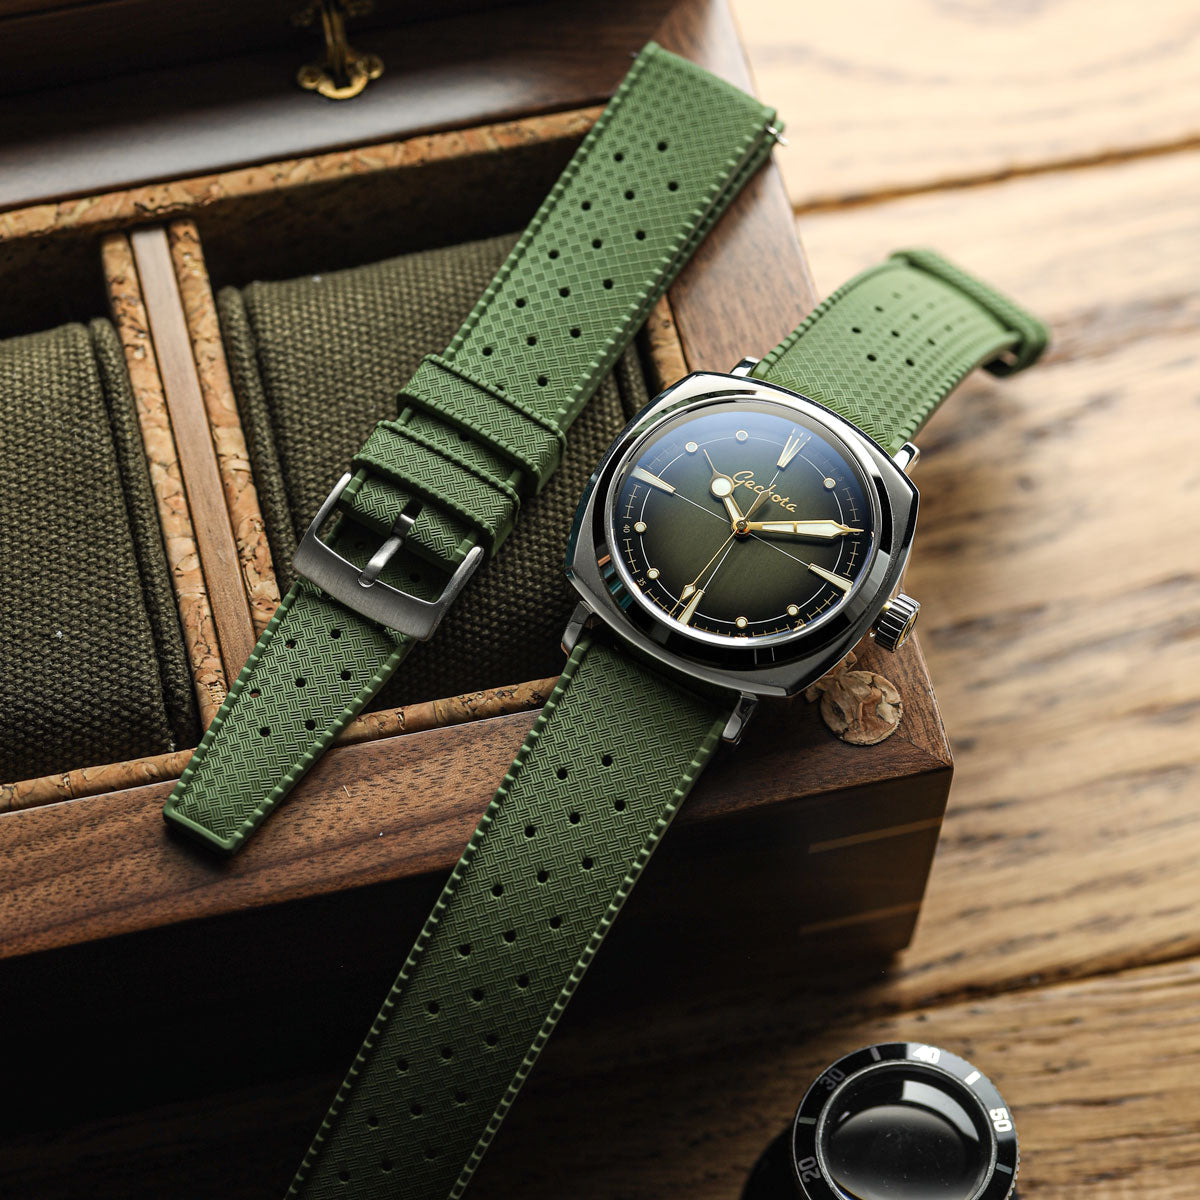 Classic Tropical Style FKM Rubber Watch Strap - Green - additional image 2